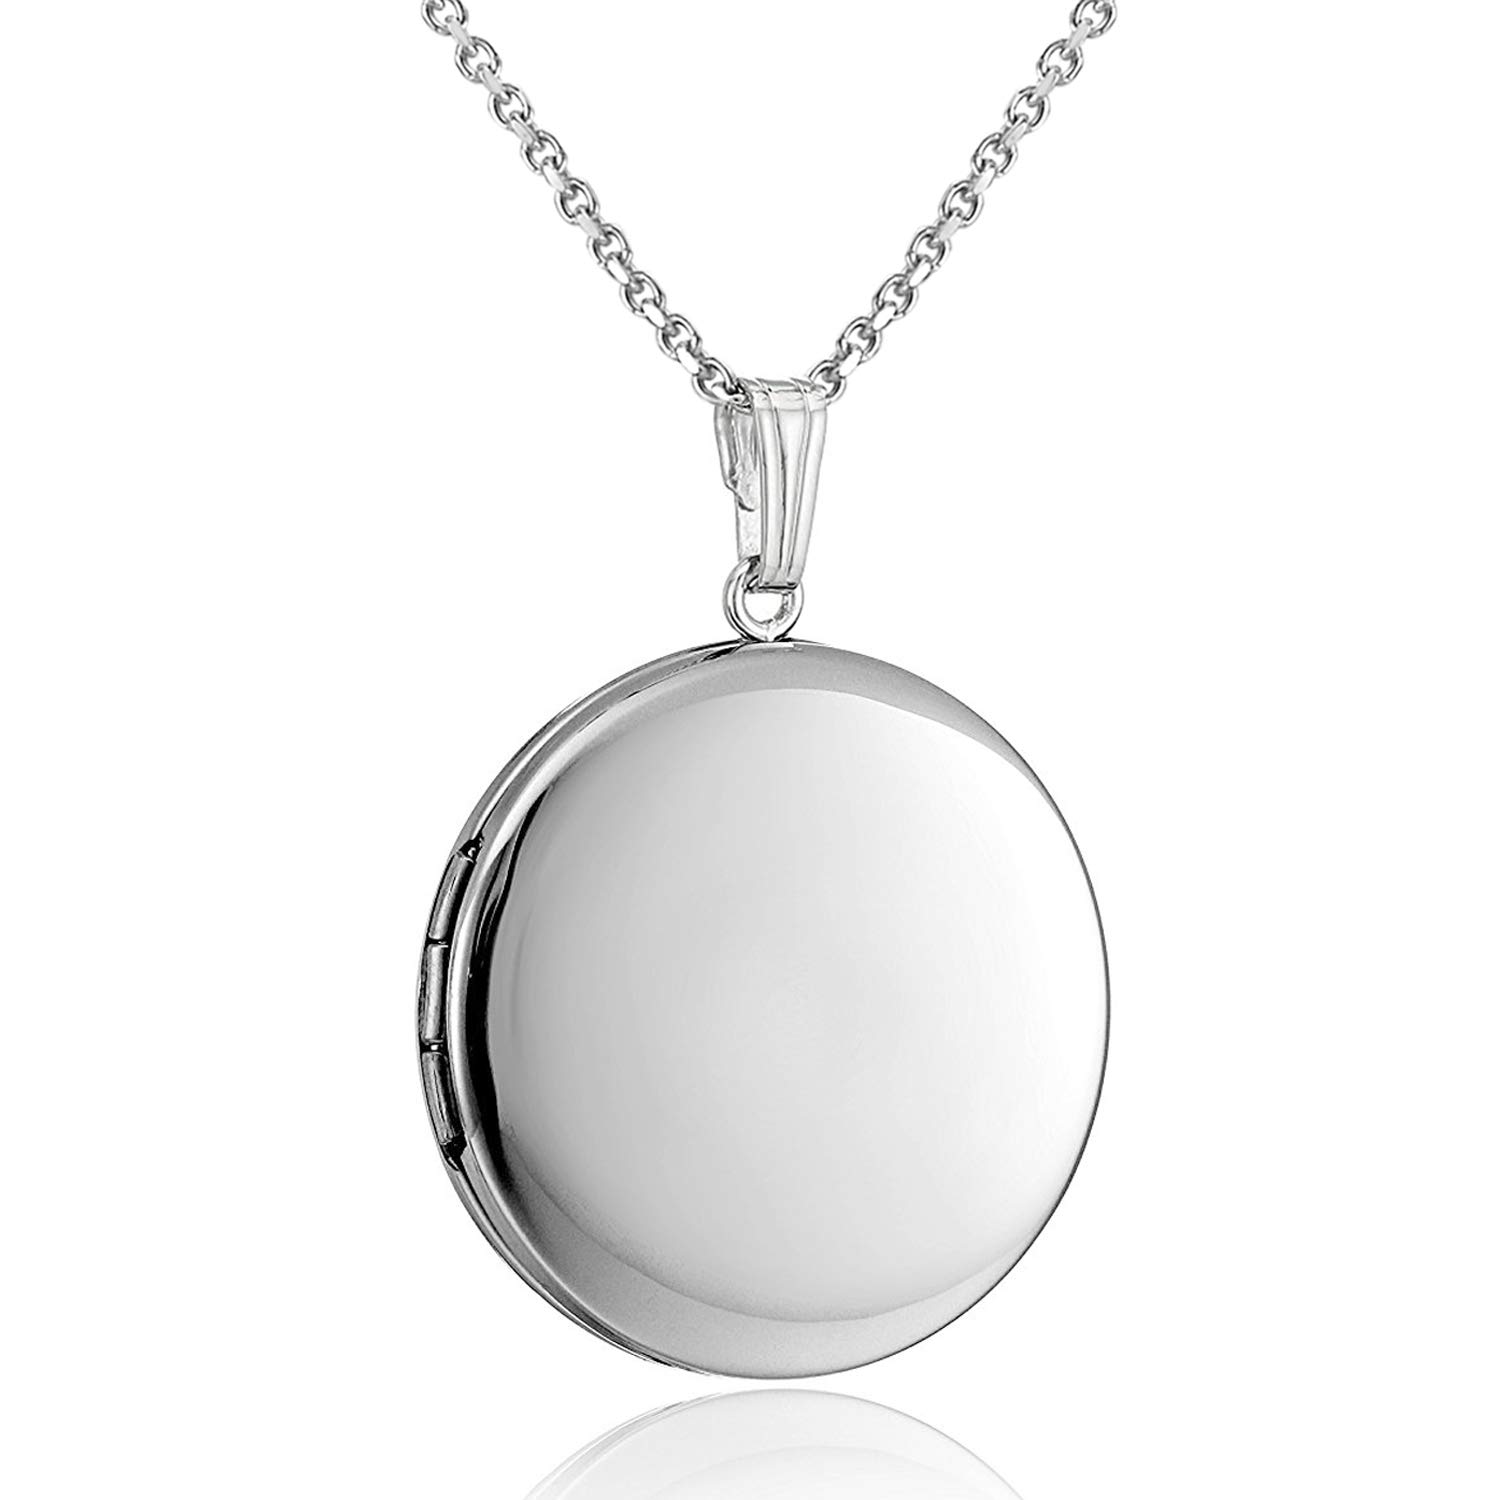 YOUFENG Round Locket Necklace that Holds Pictures Heart Circle Shape Lockets Gift for Girl Jewelry